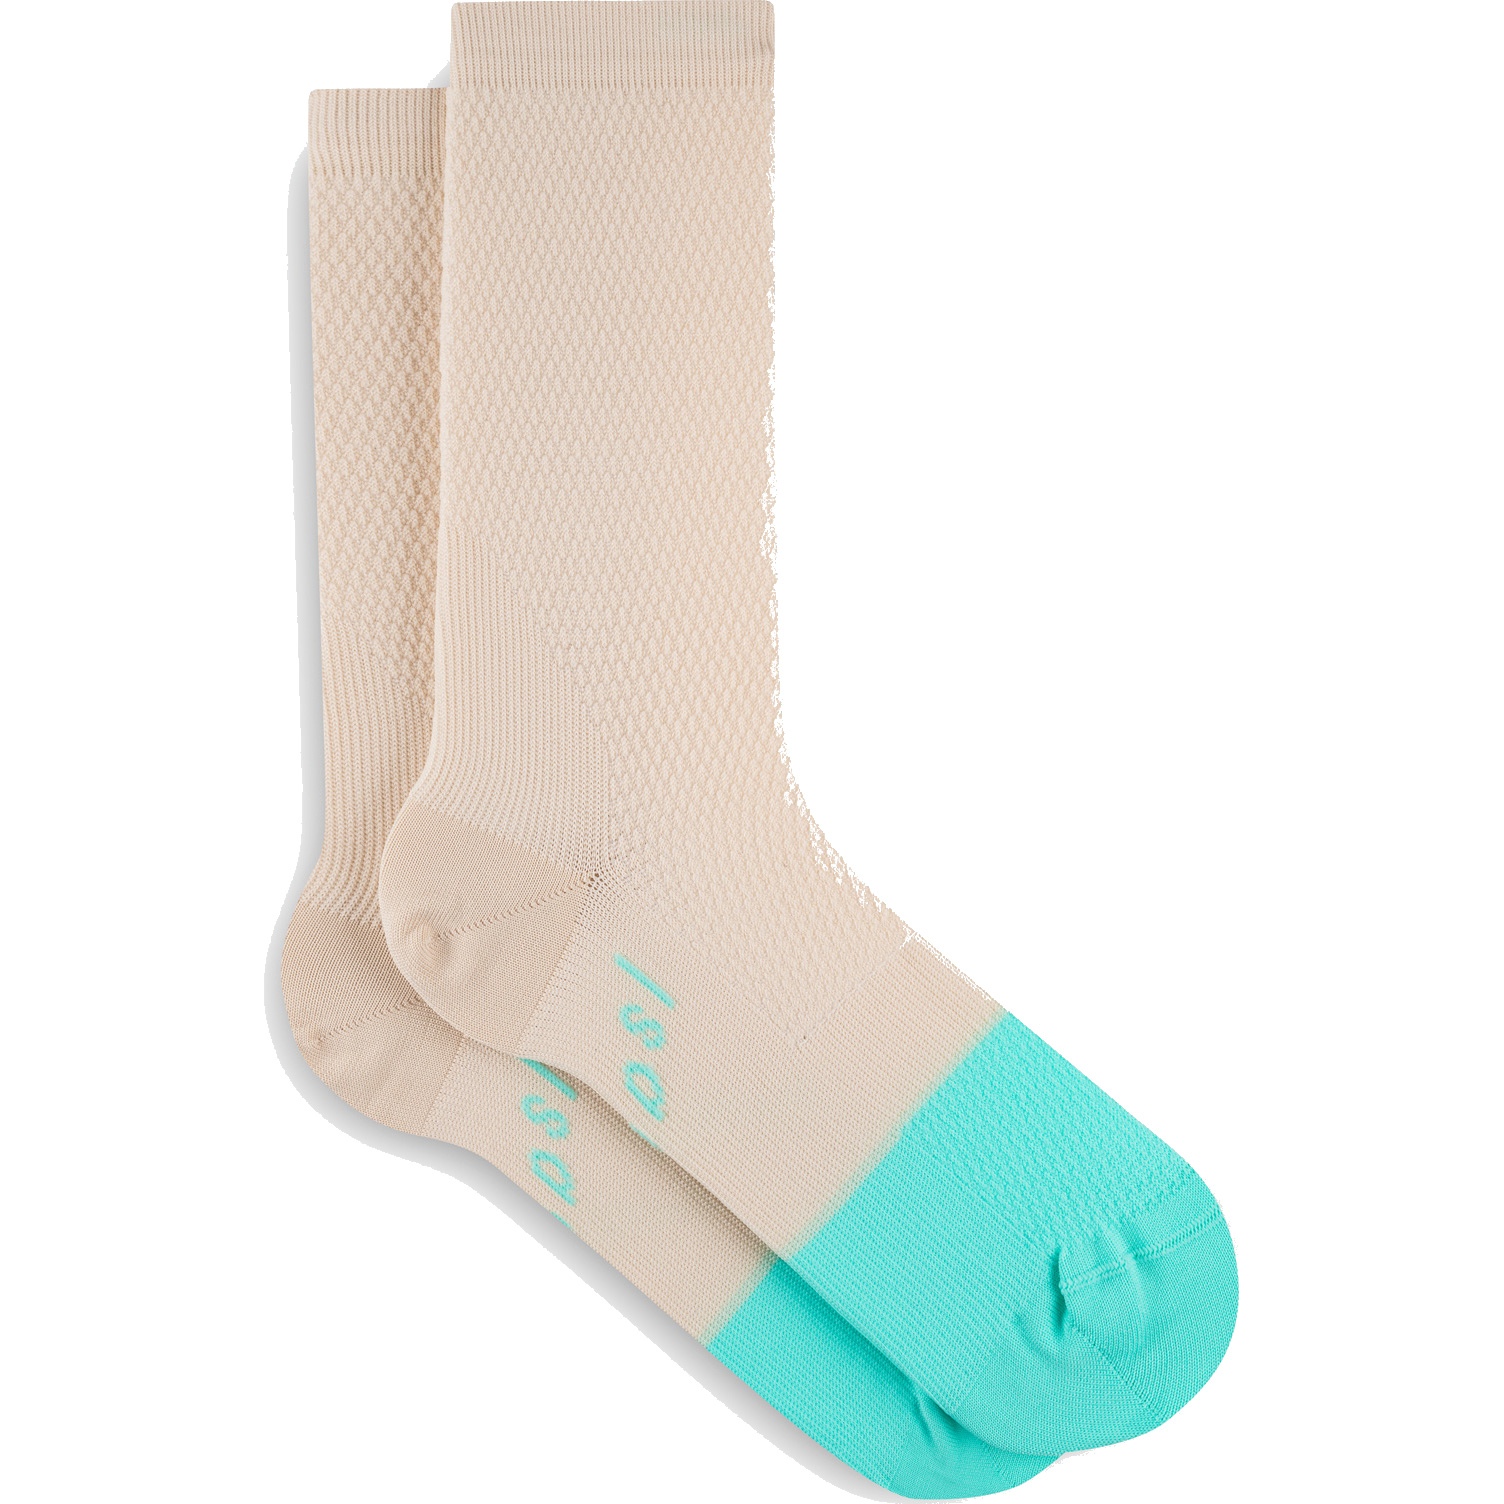 Picture of Isadore Echelon Cycling Socks 2.0 - Almond Milk